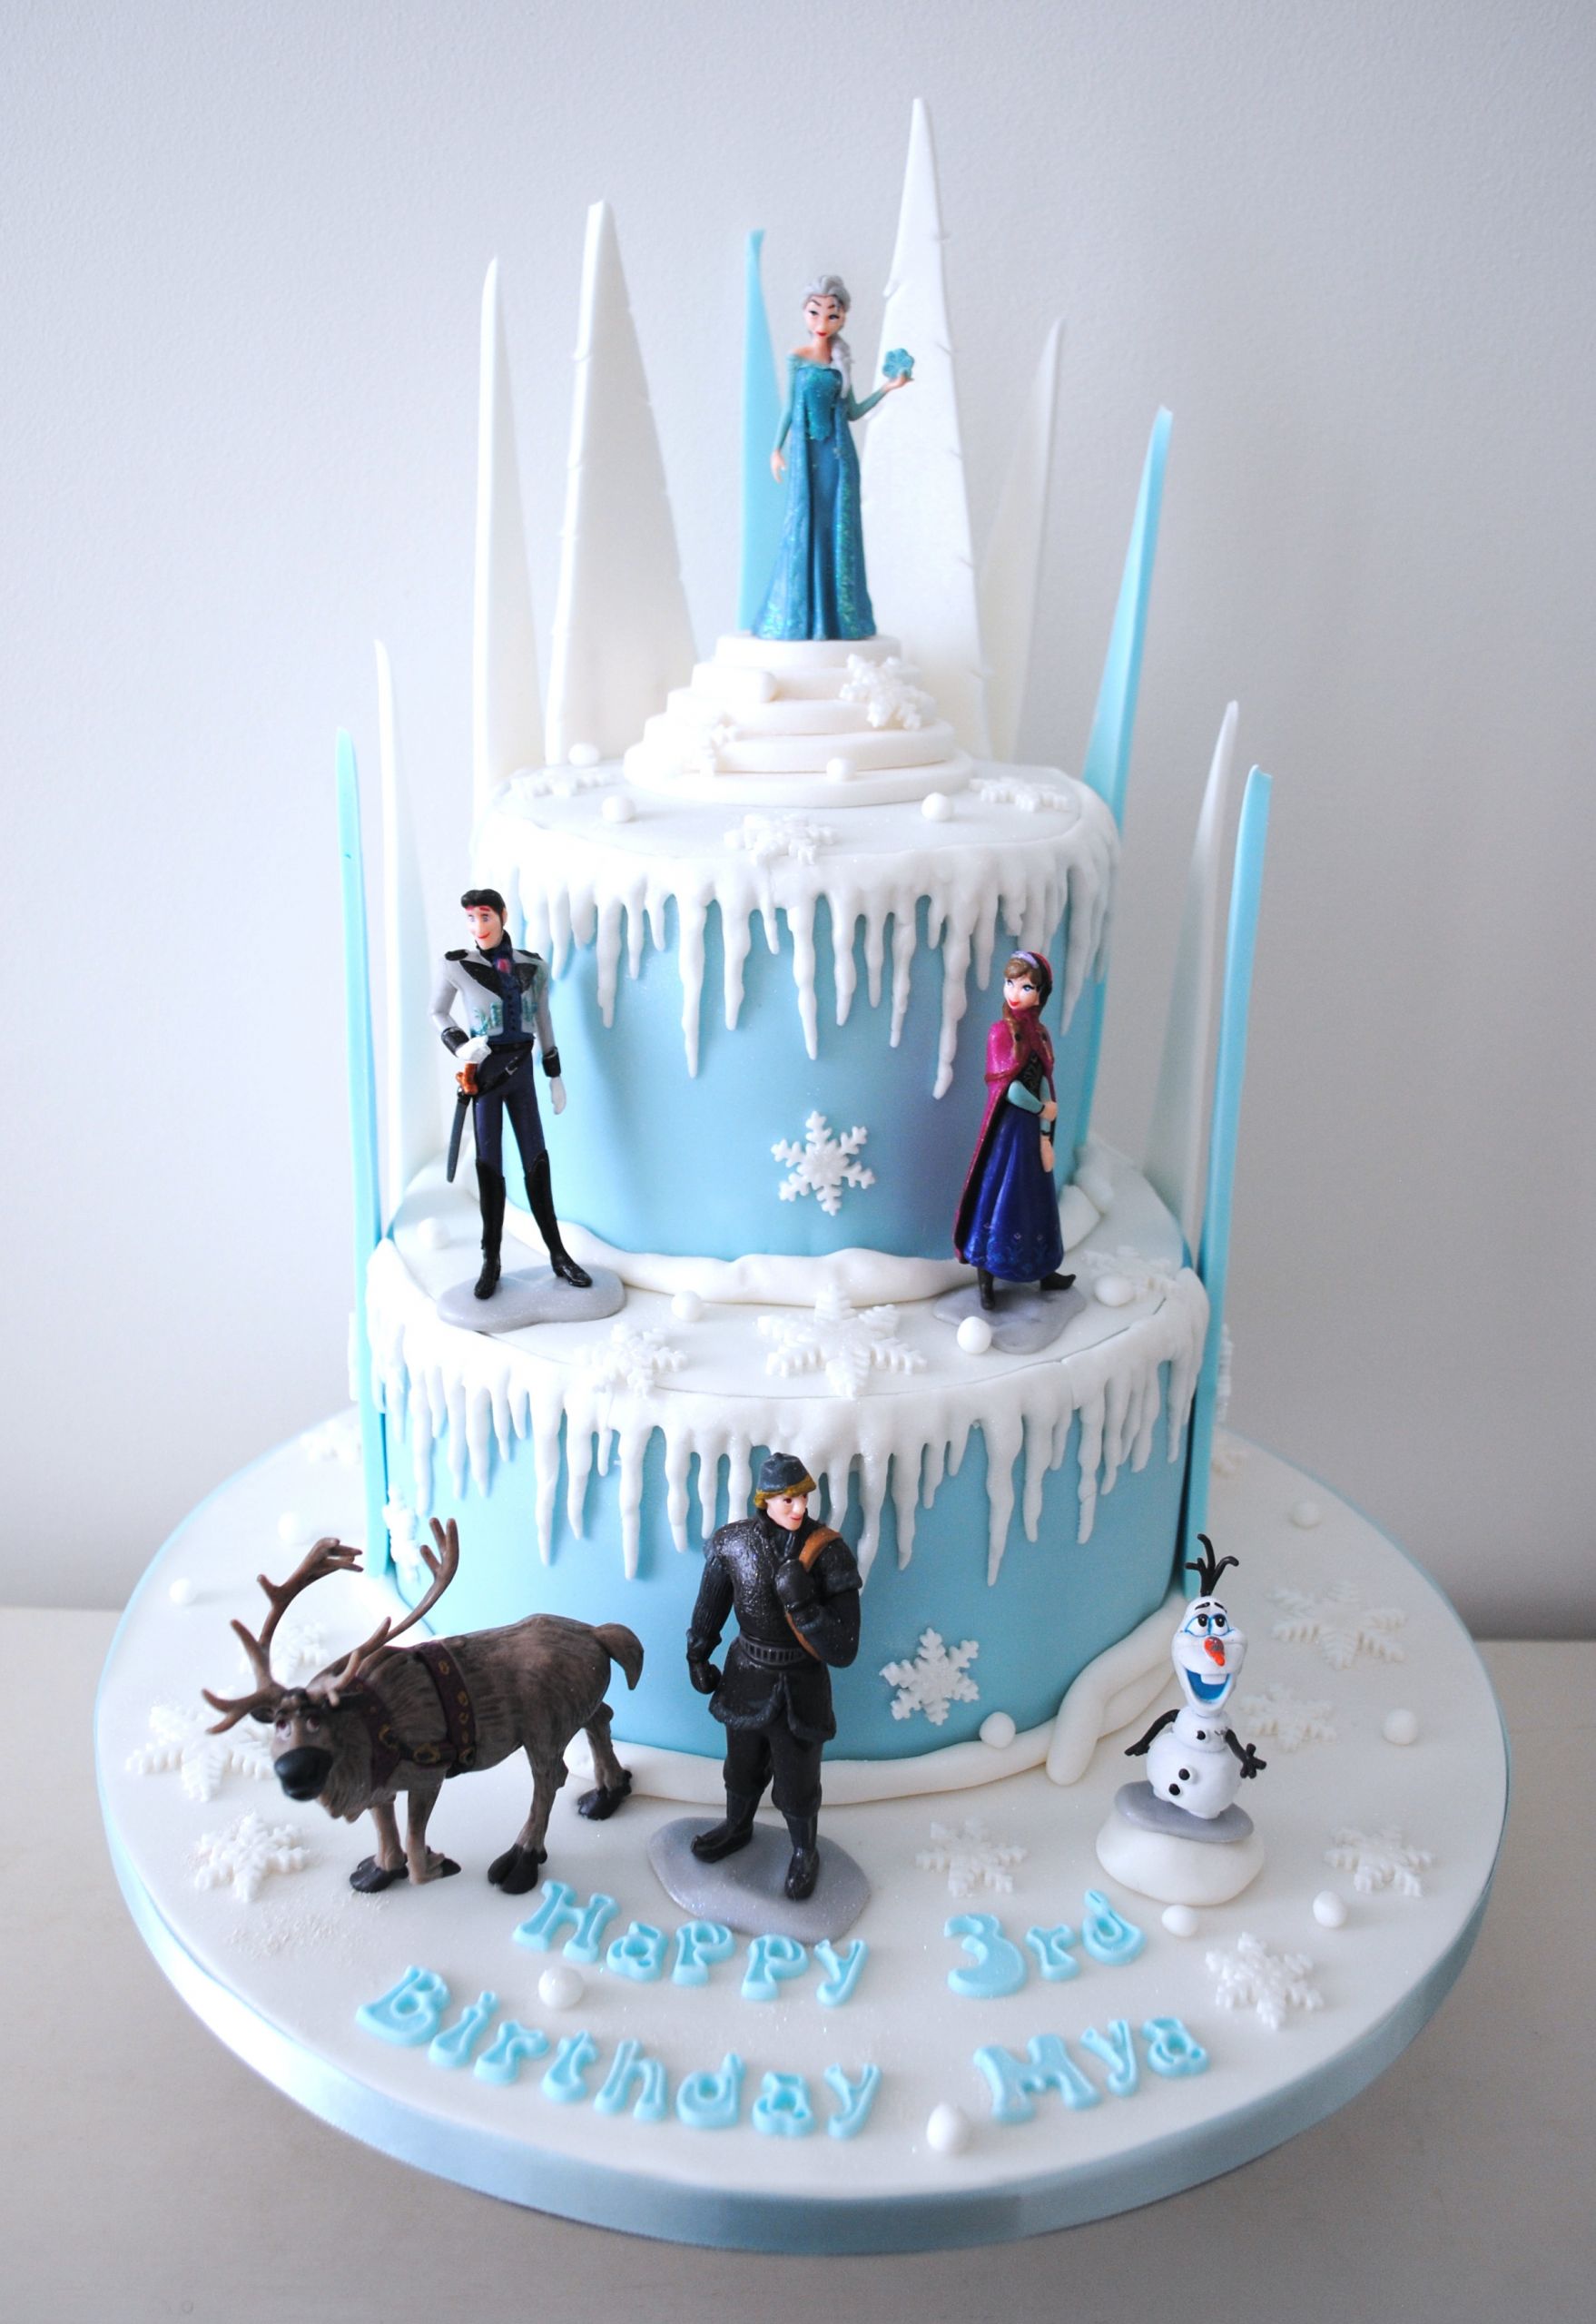 Frozen Birthday Cakes Images
 tagged "celebration cakes"